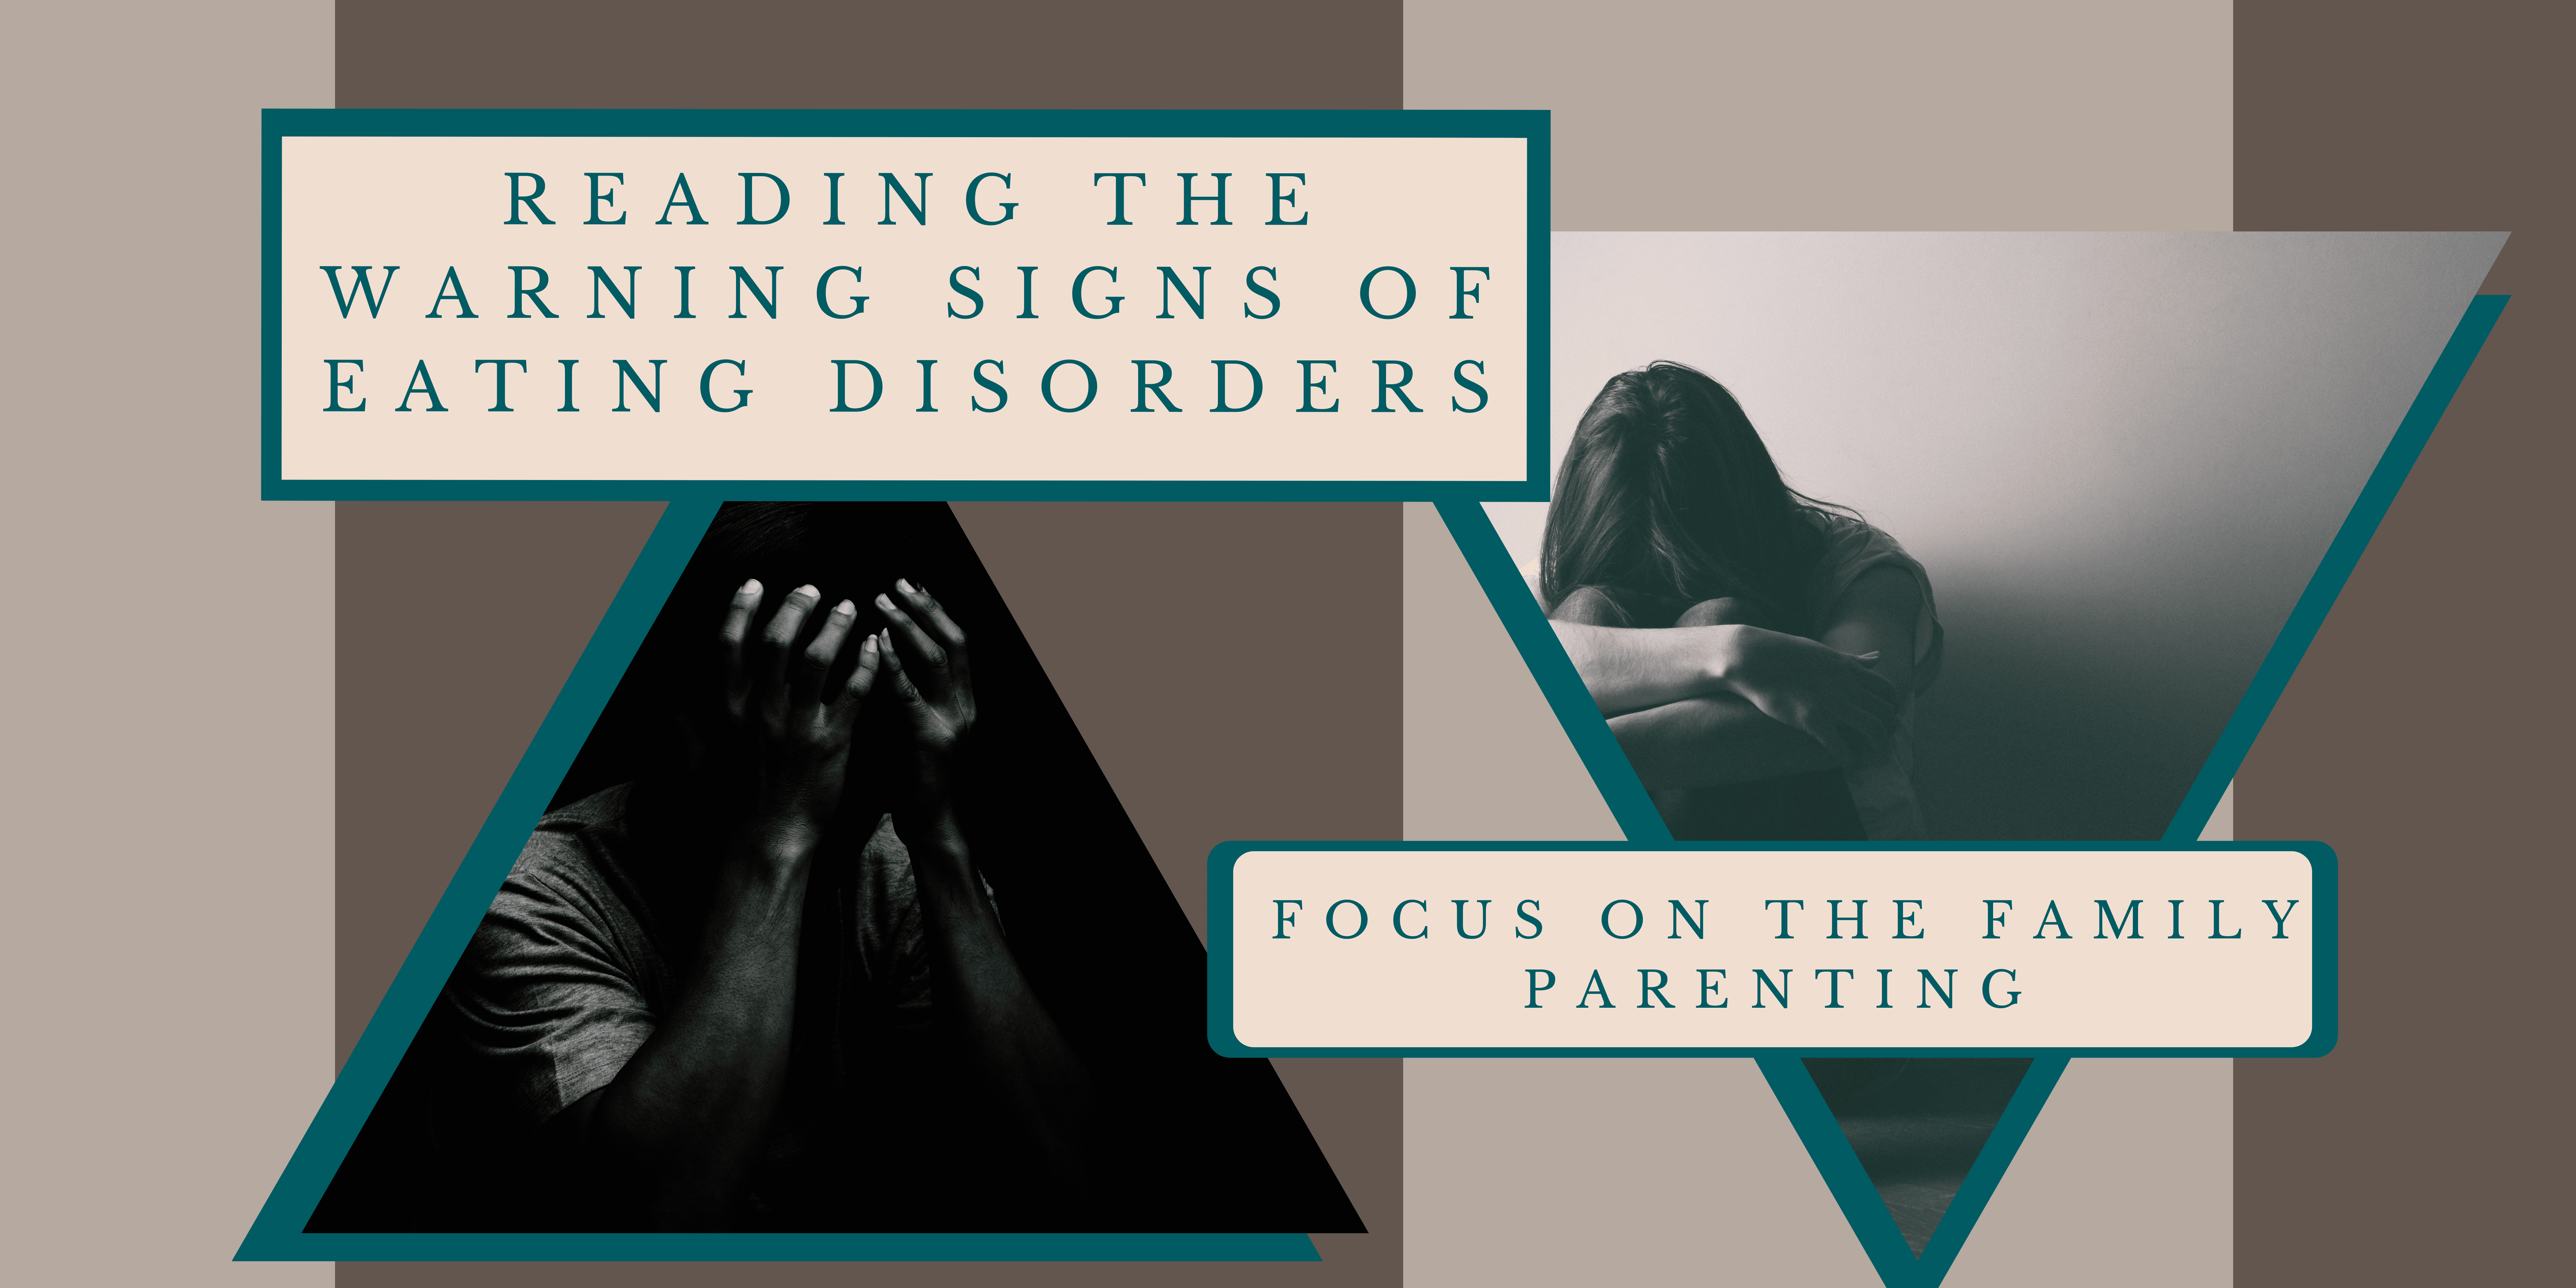 Warning Signs of Eating Disorders